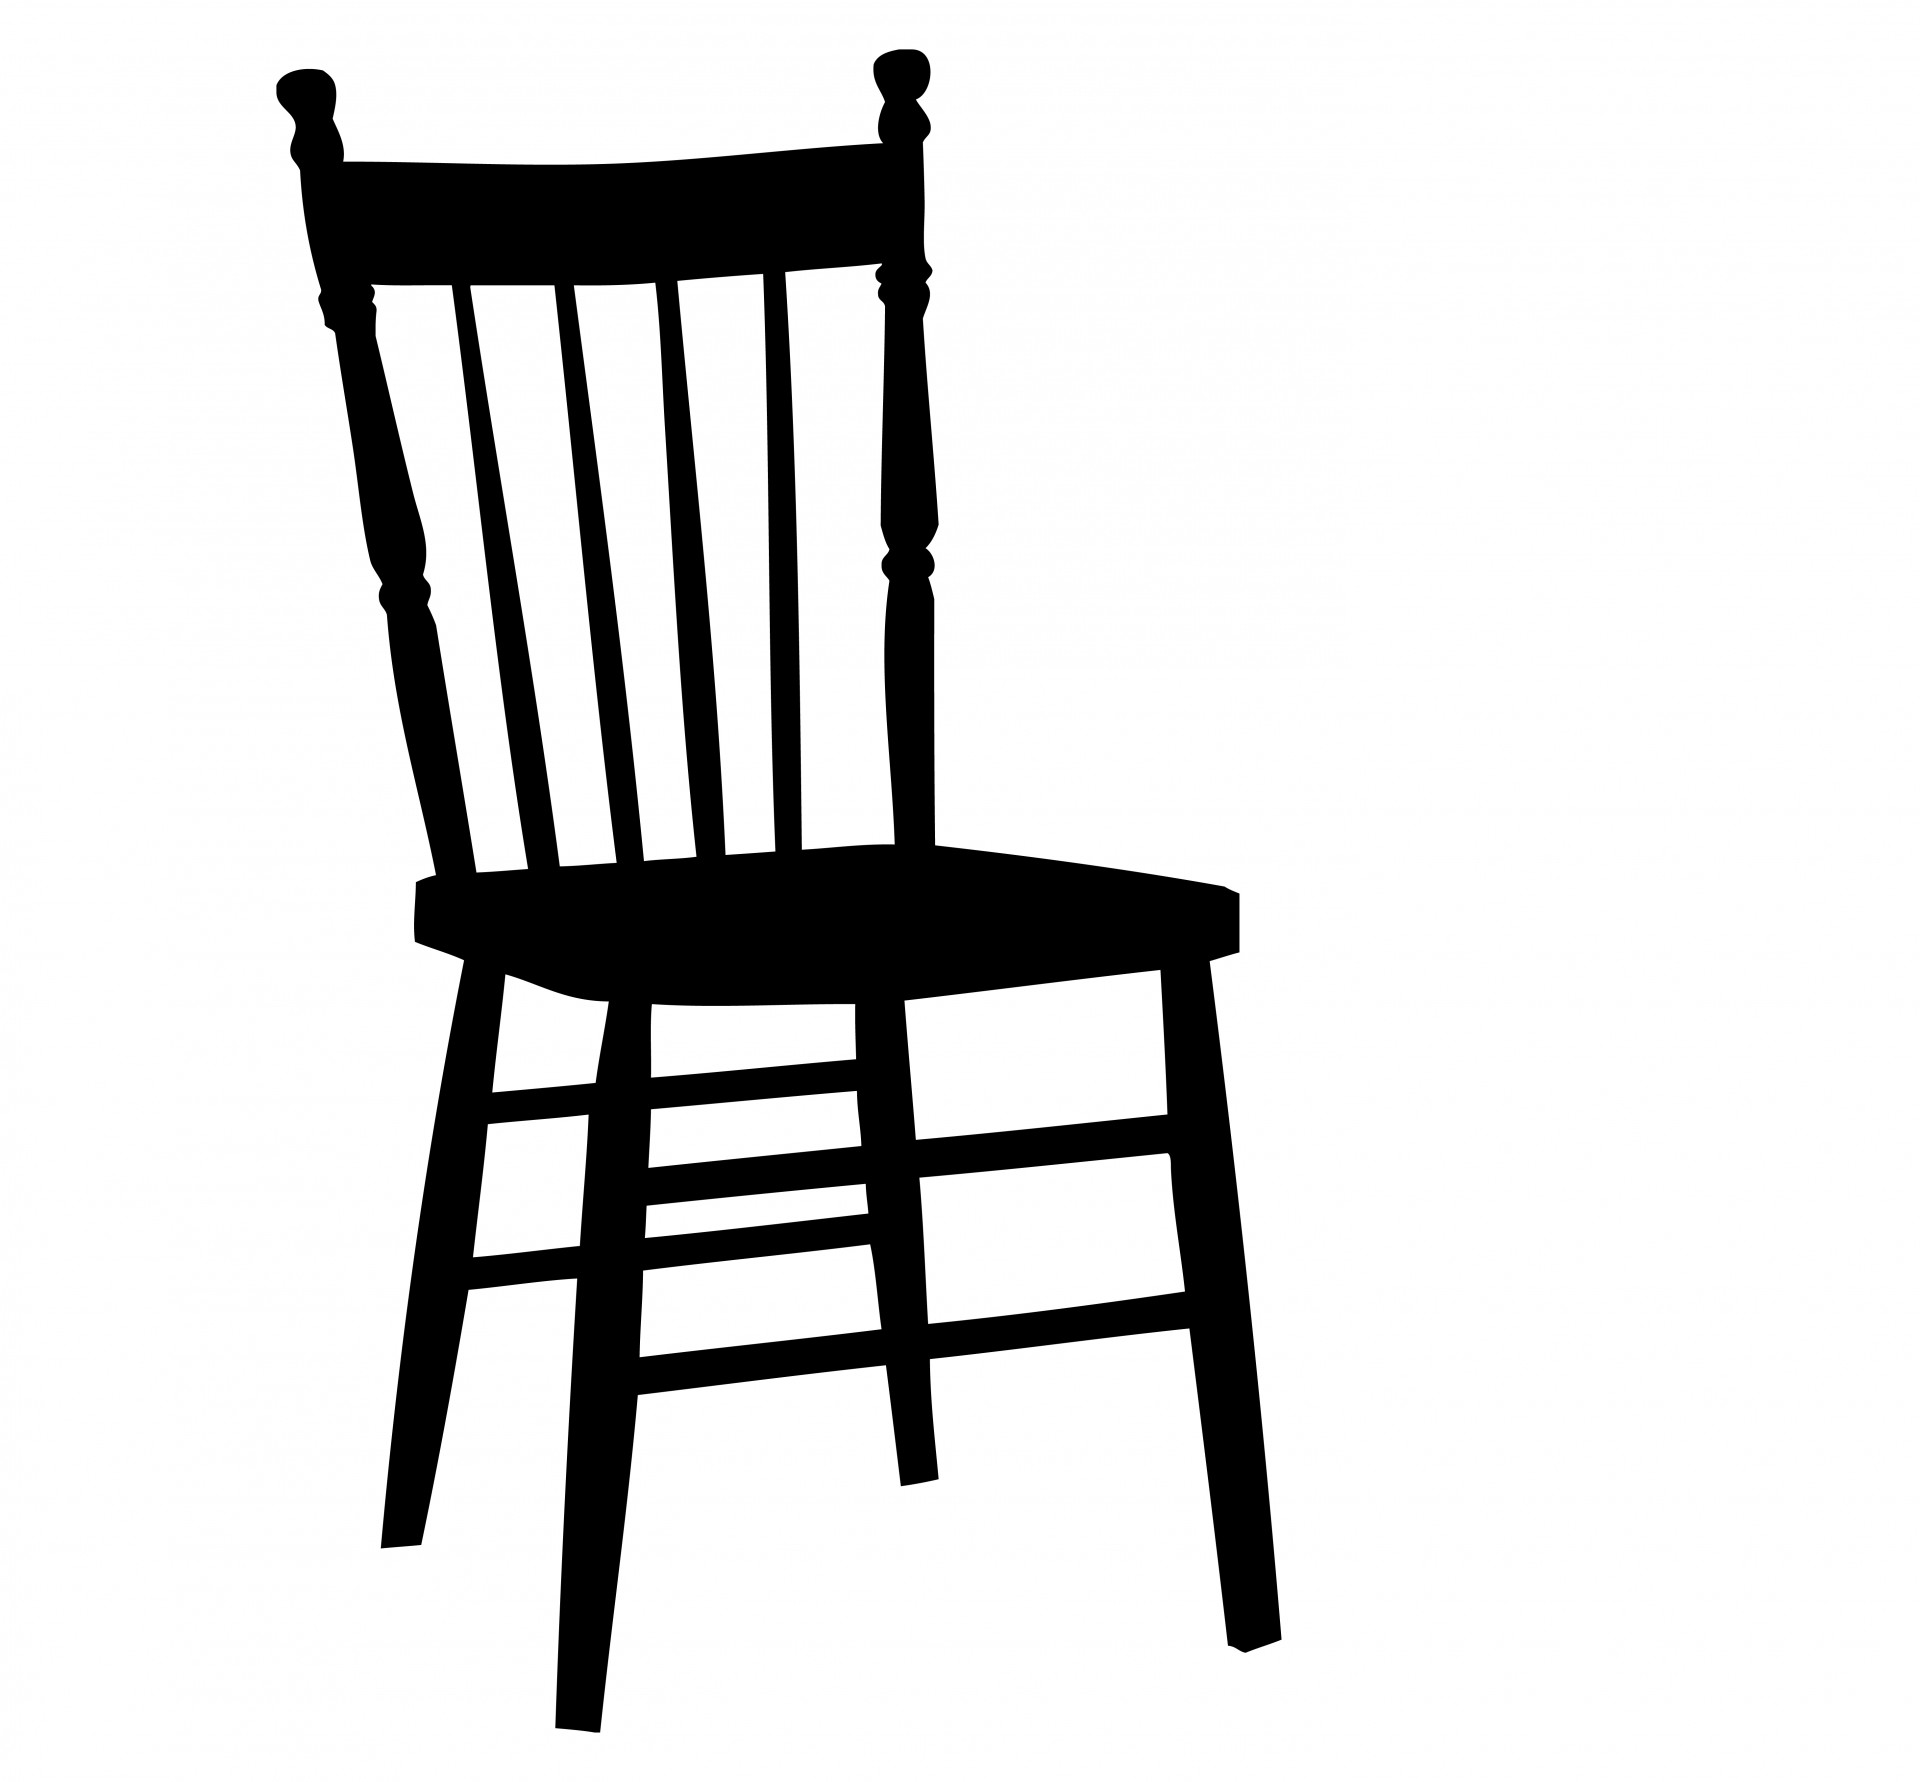 Download free photo of Chair,wooden,hard,seat,seating - from 